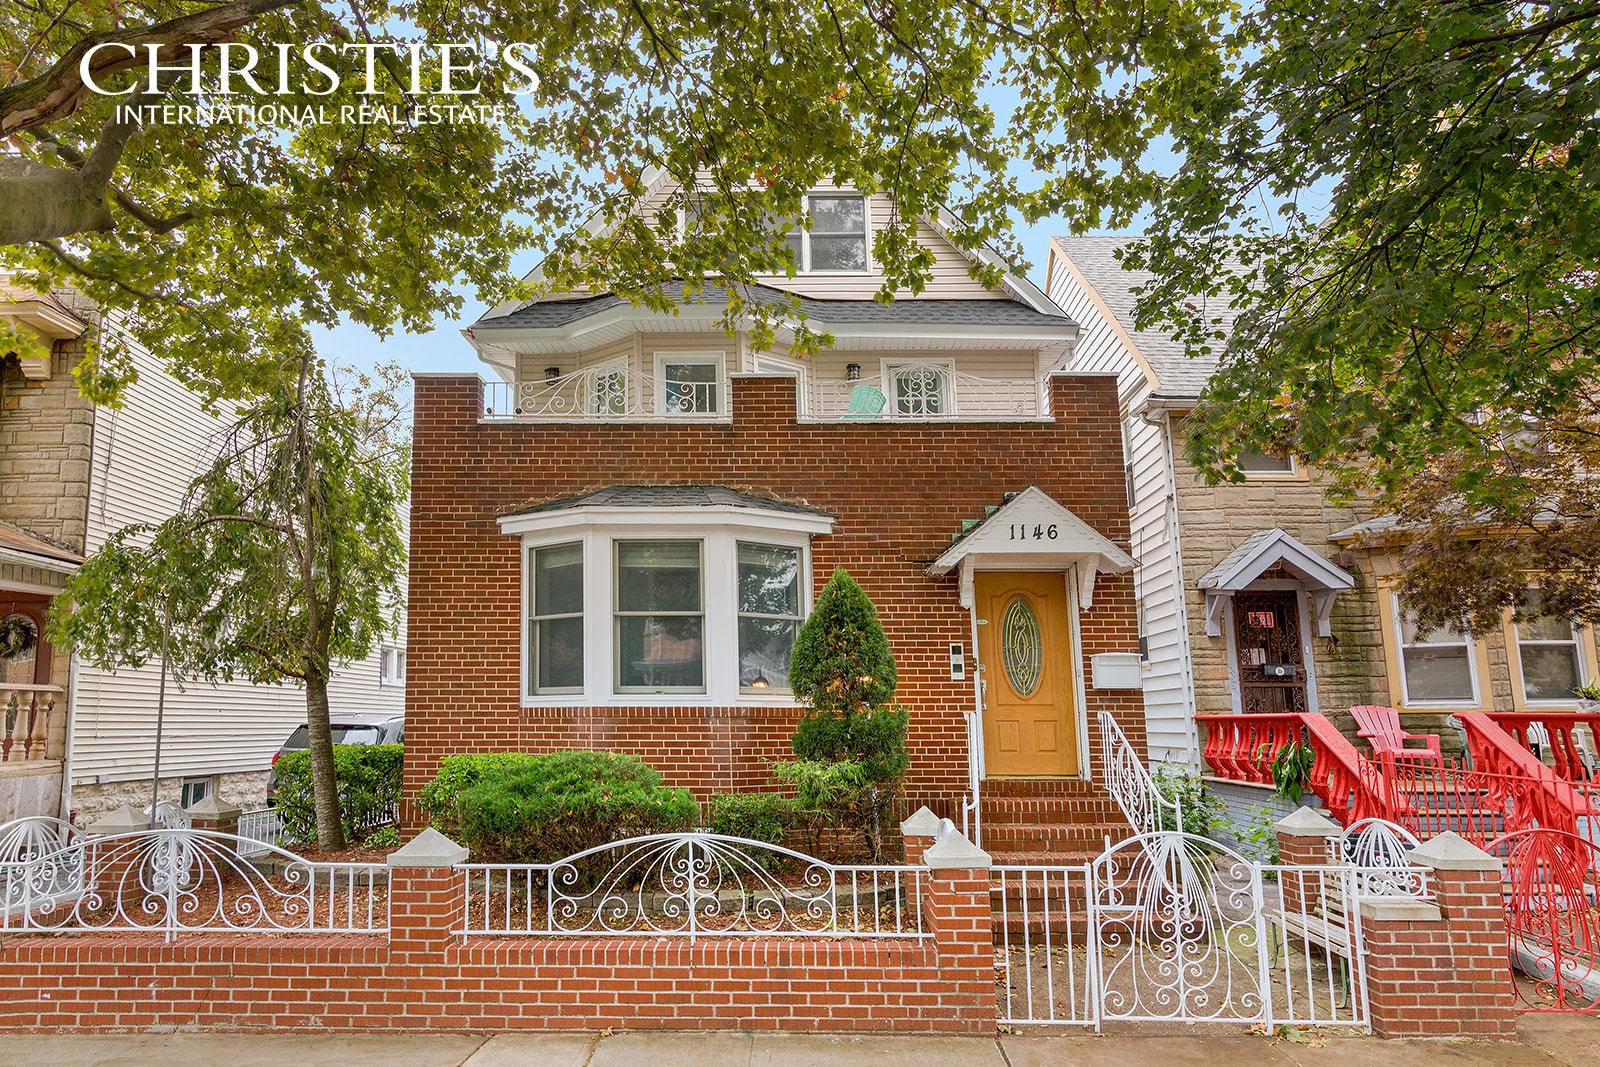 Style and functionality meet at 1146 East 37th Street, a beautifully renovated home in East Flatbush.